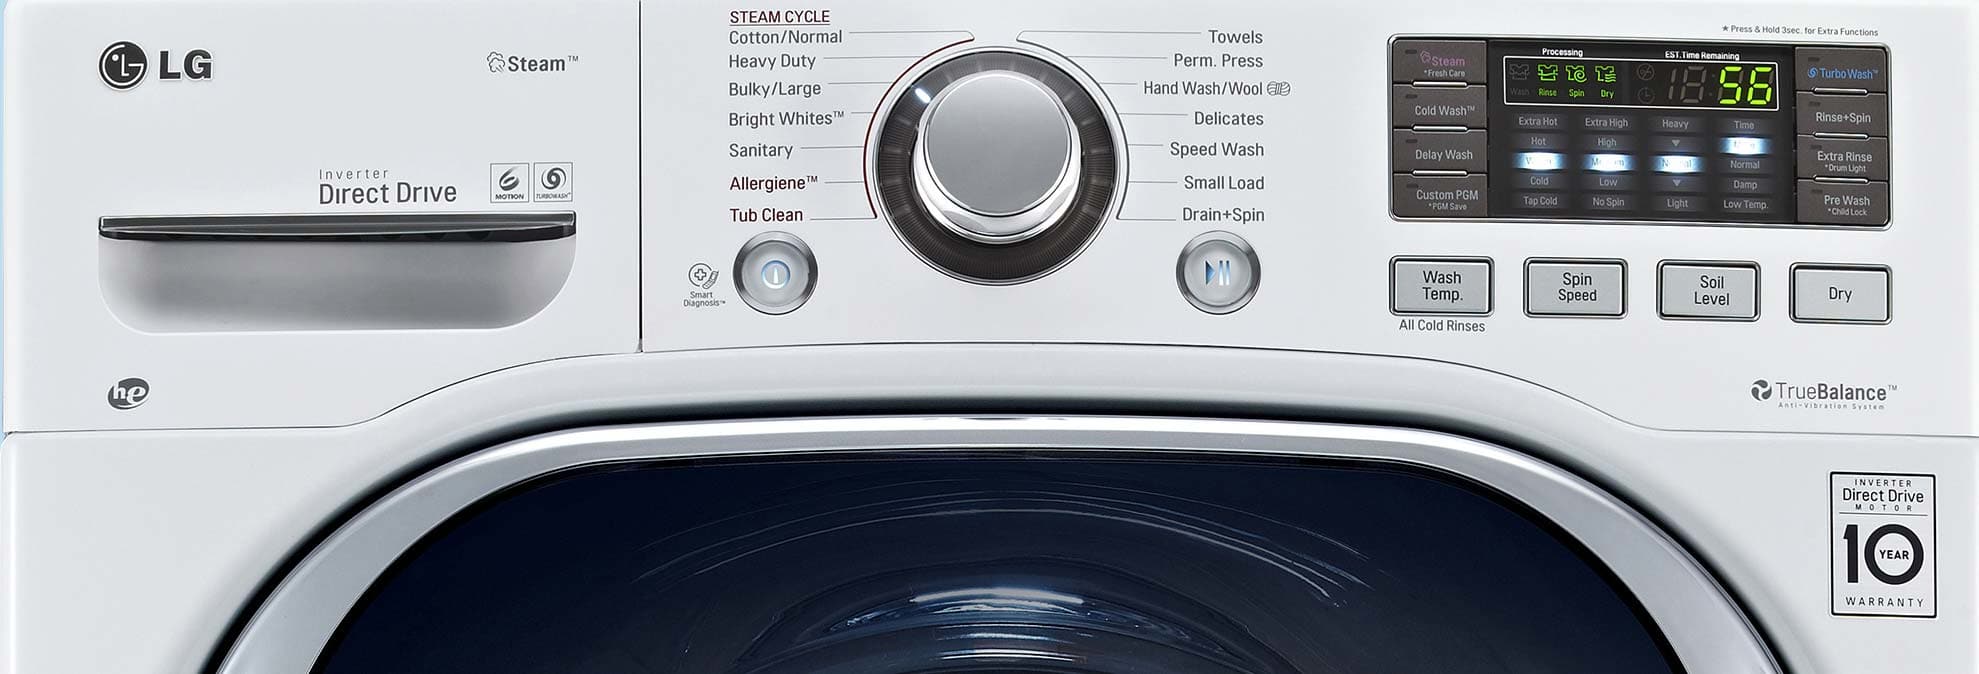 AllinOne Washer/Dryer Review Consumer Reports